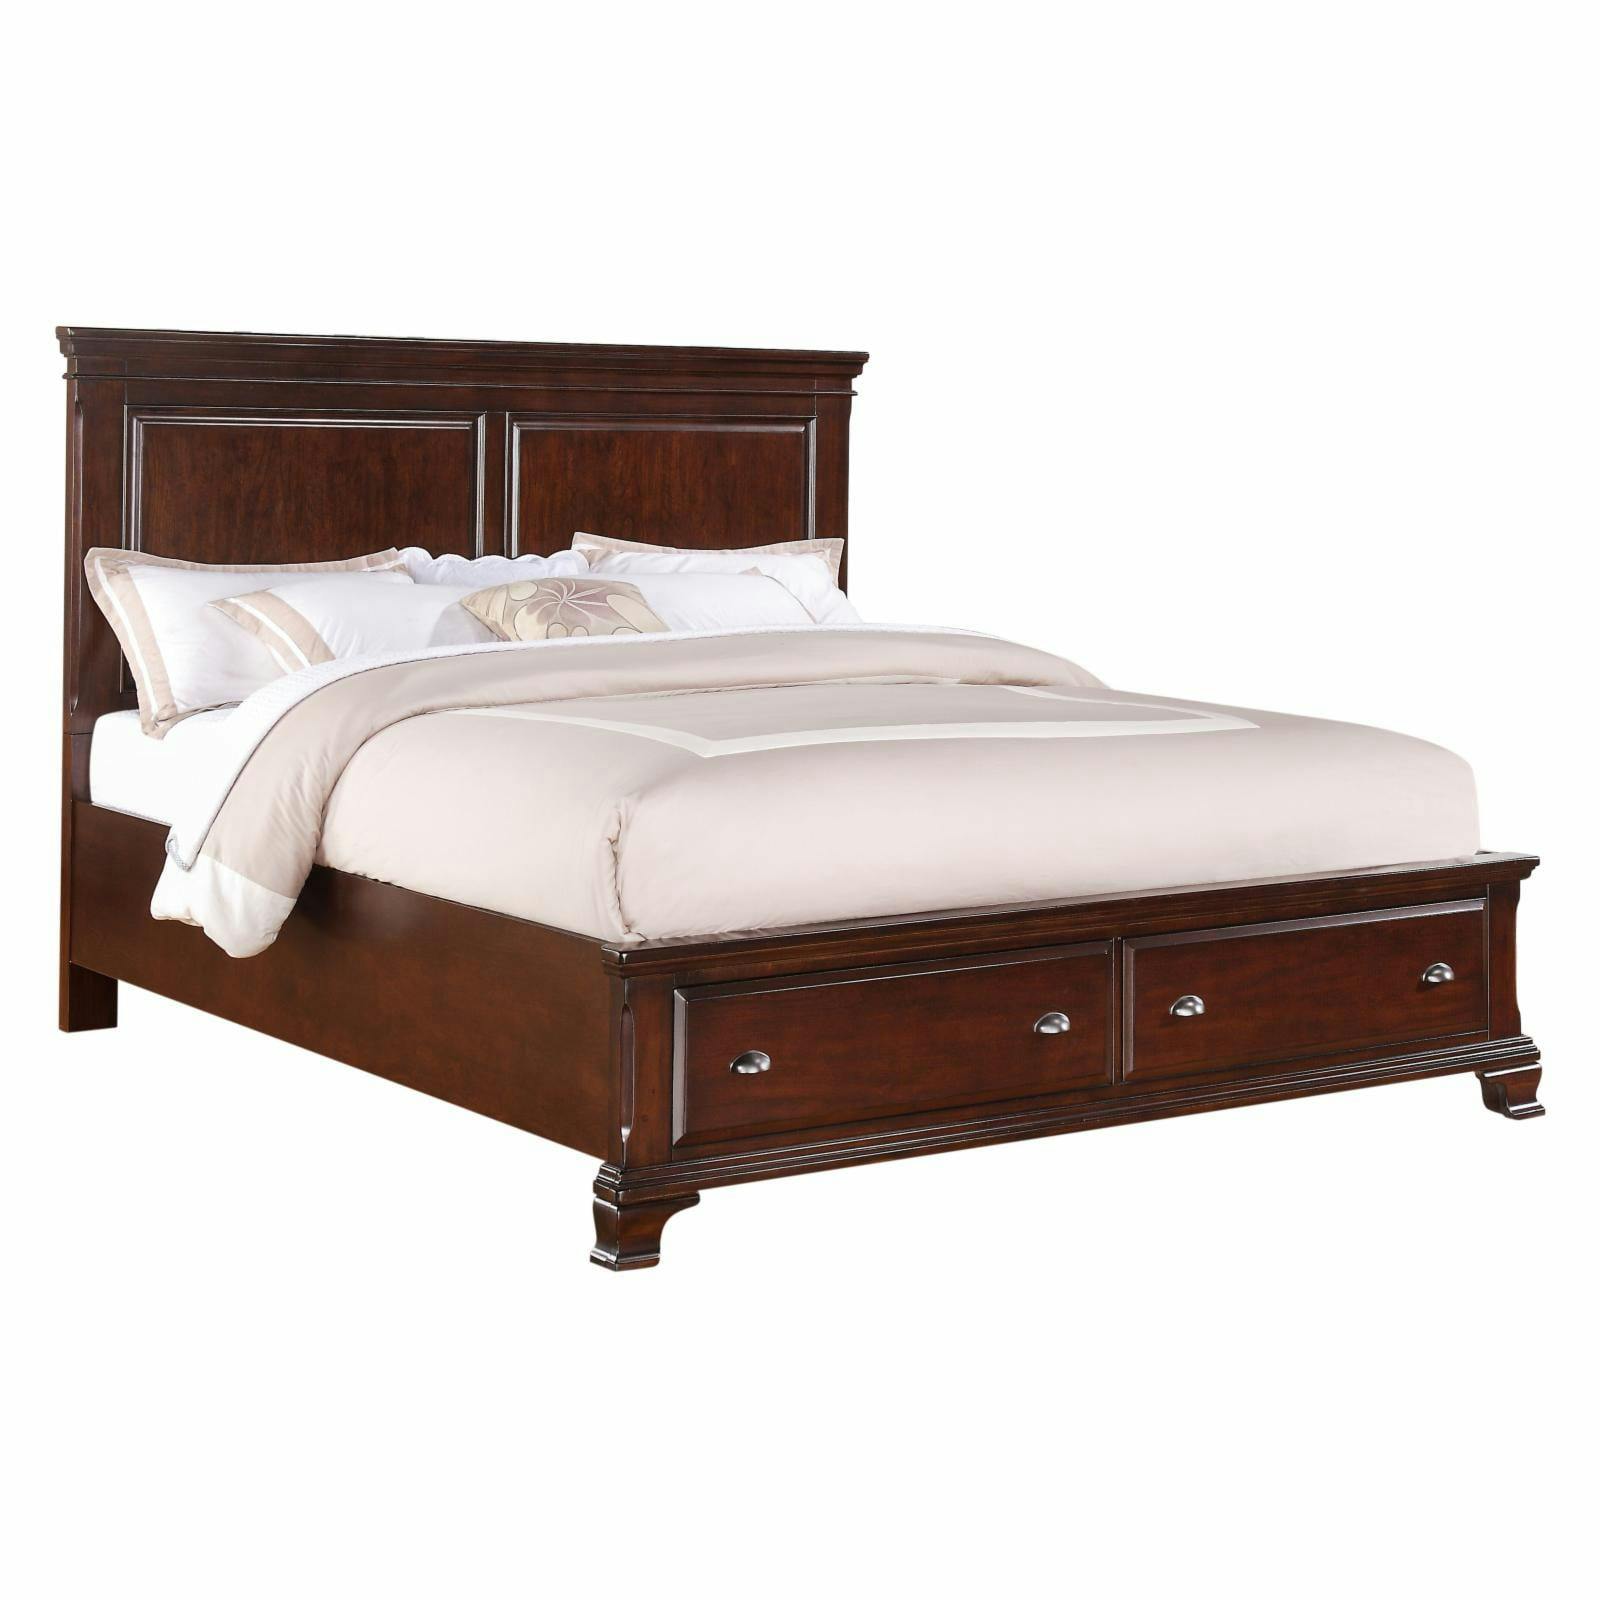 Traditional King-Sized Pine Wood Storage Bed with Upholstered Headboard in Brown